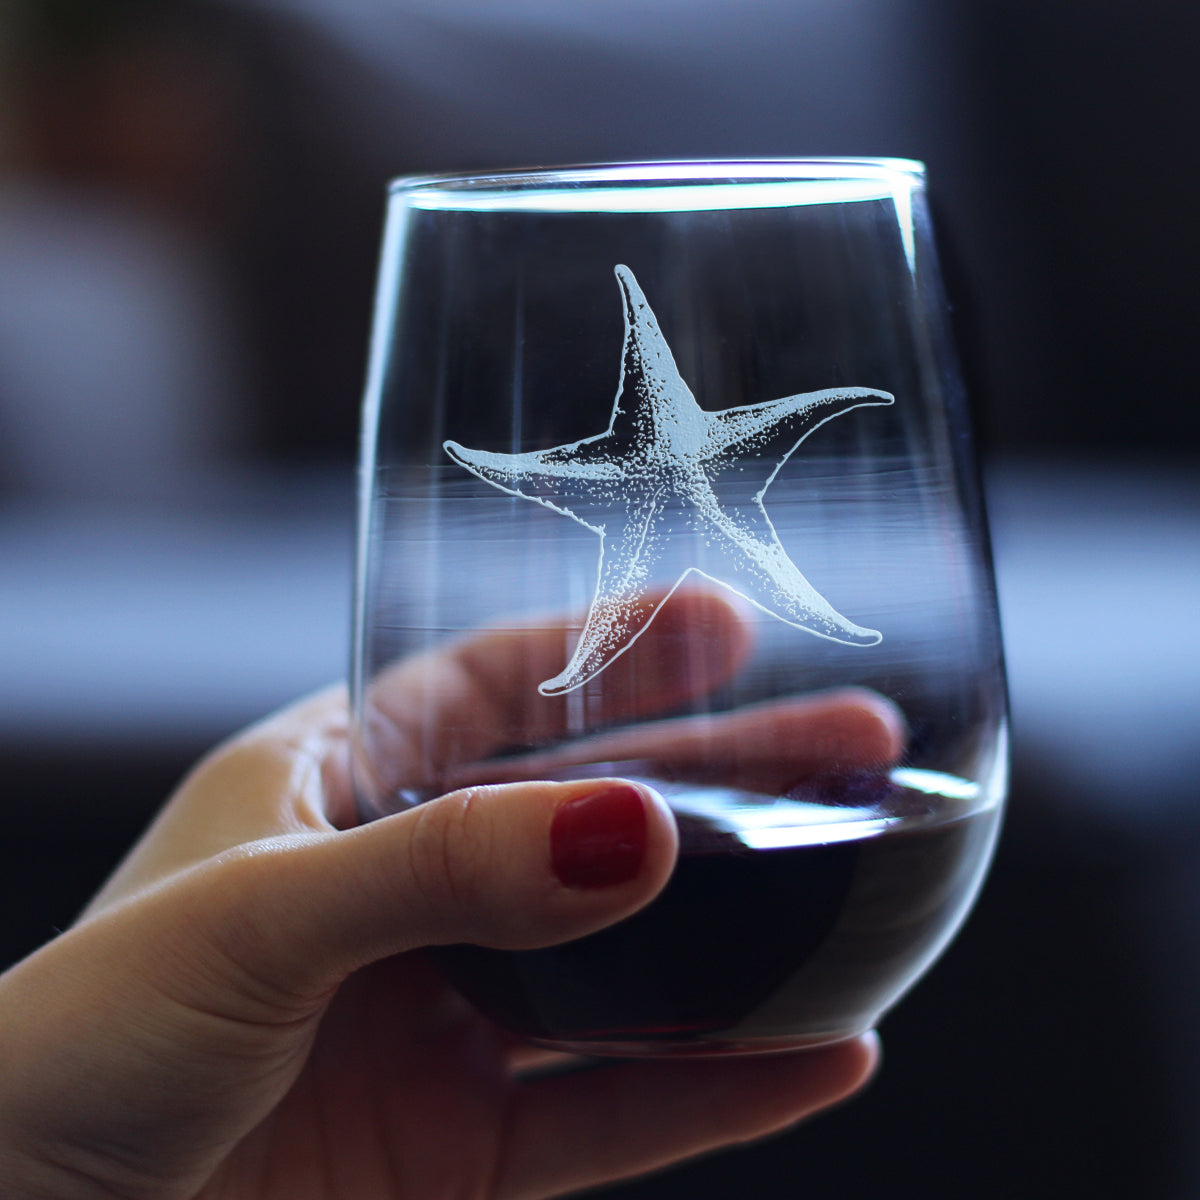 Starfish Stemless Wine Glass - Beach Themed Decor and Decorative Ocean Glassware Gifts for Women and Men - Large 17 Oz Glasses